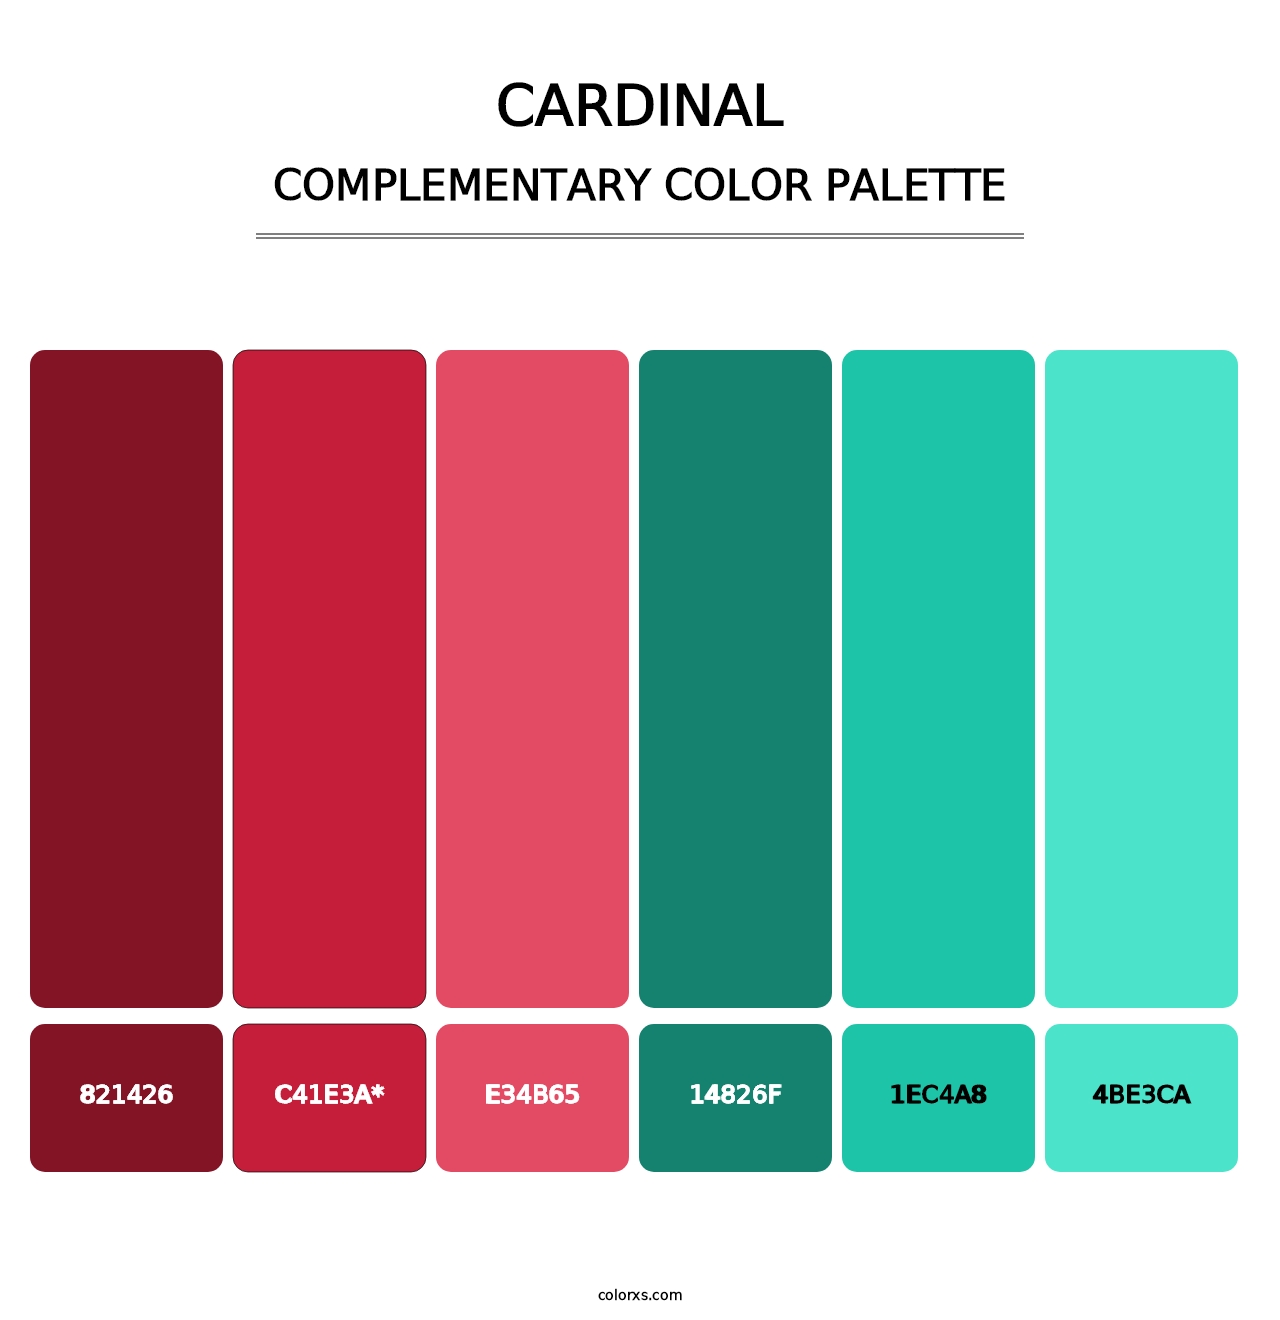 Cardinal - Complementary Color Palette